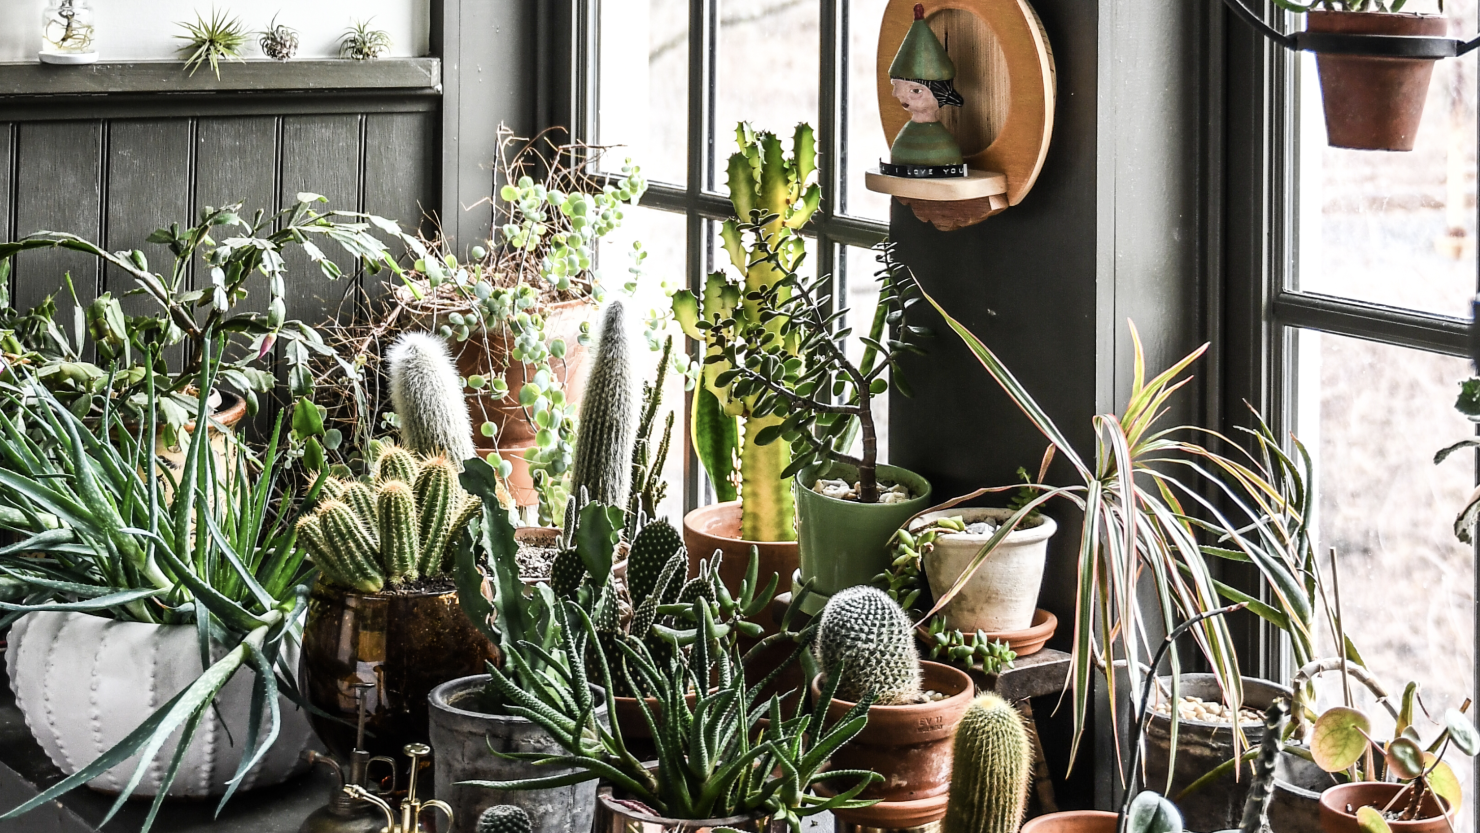 Learn the art of watering houseplants and show off the green thumb you always knew you had.